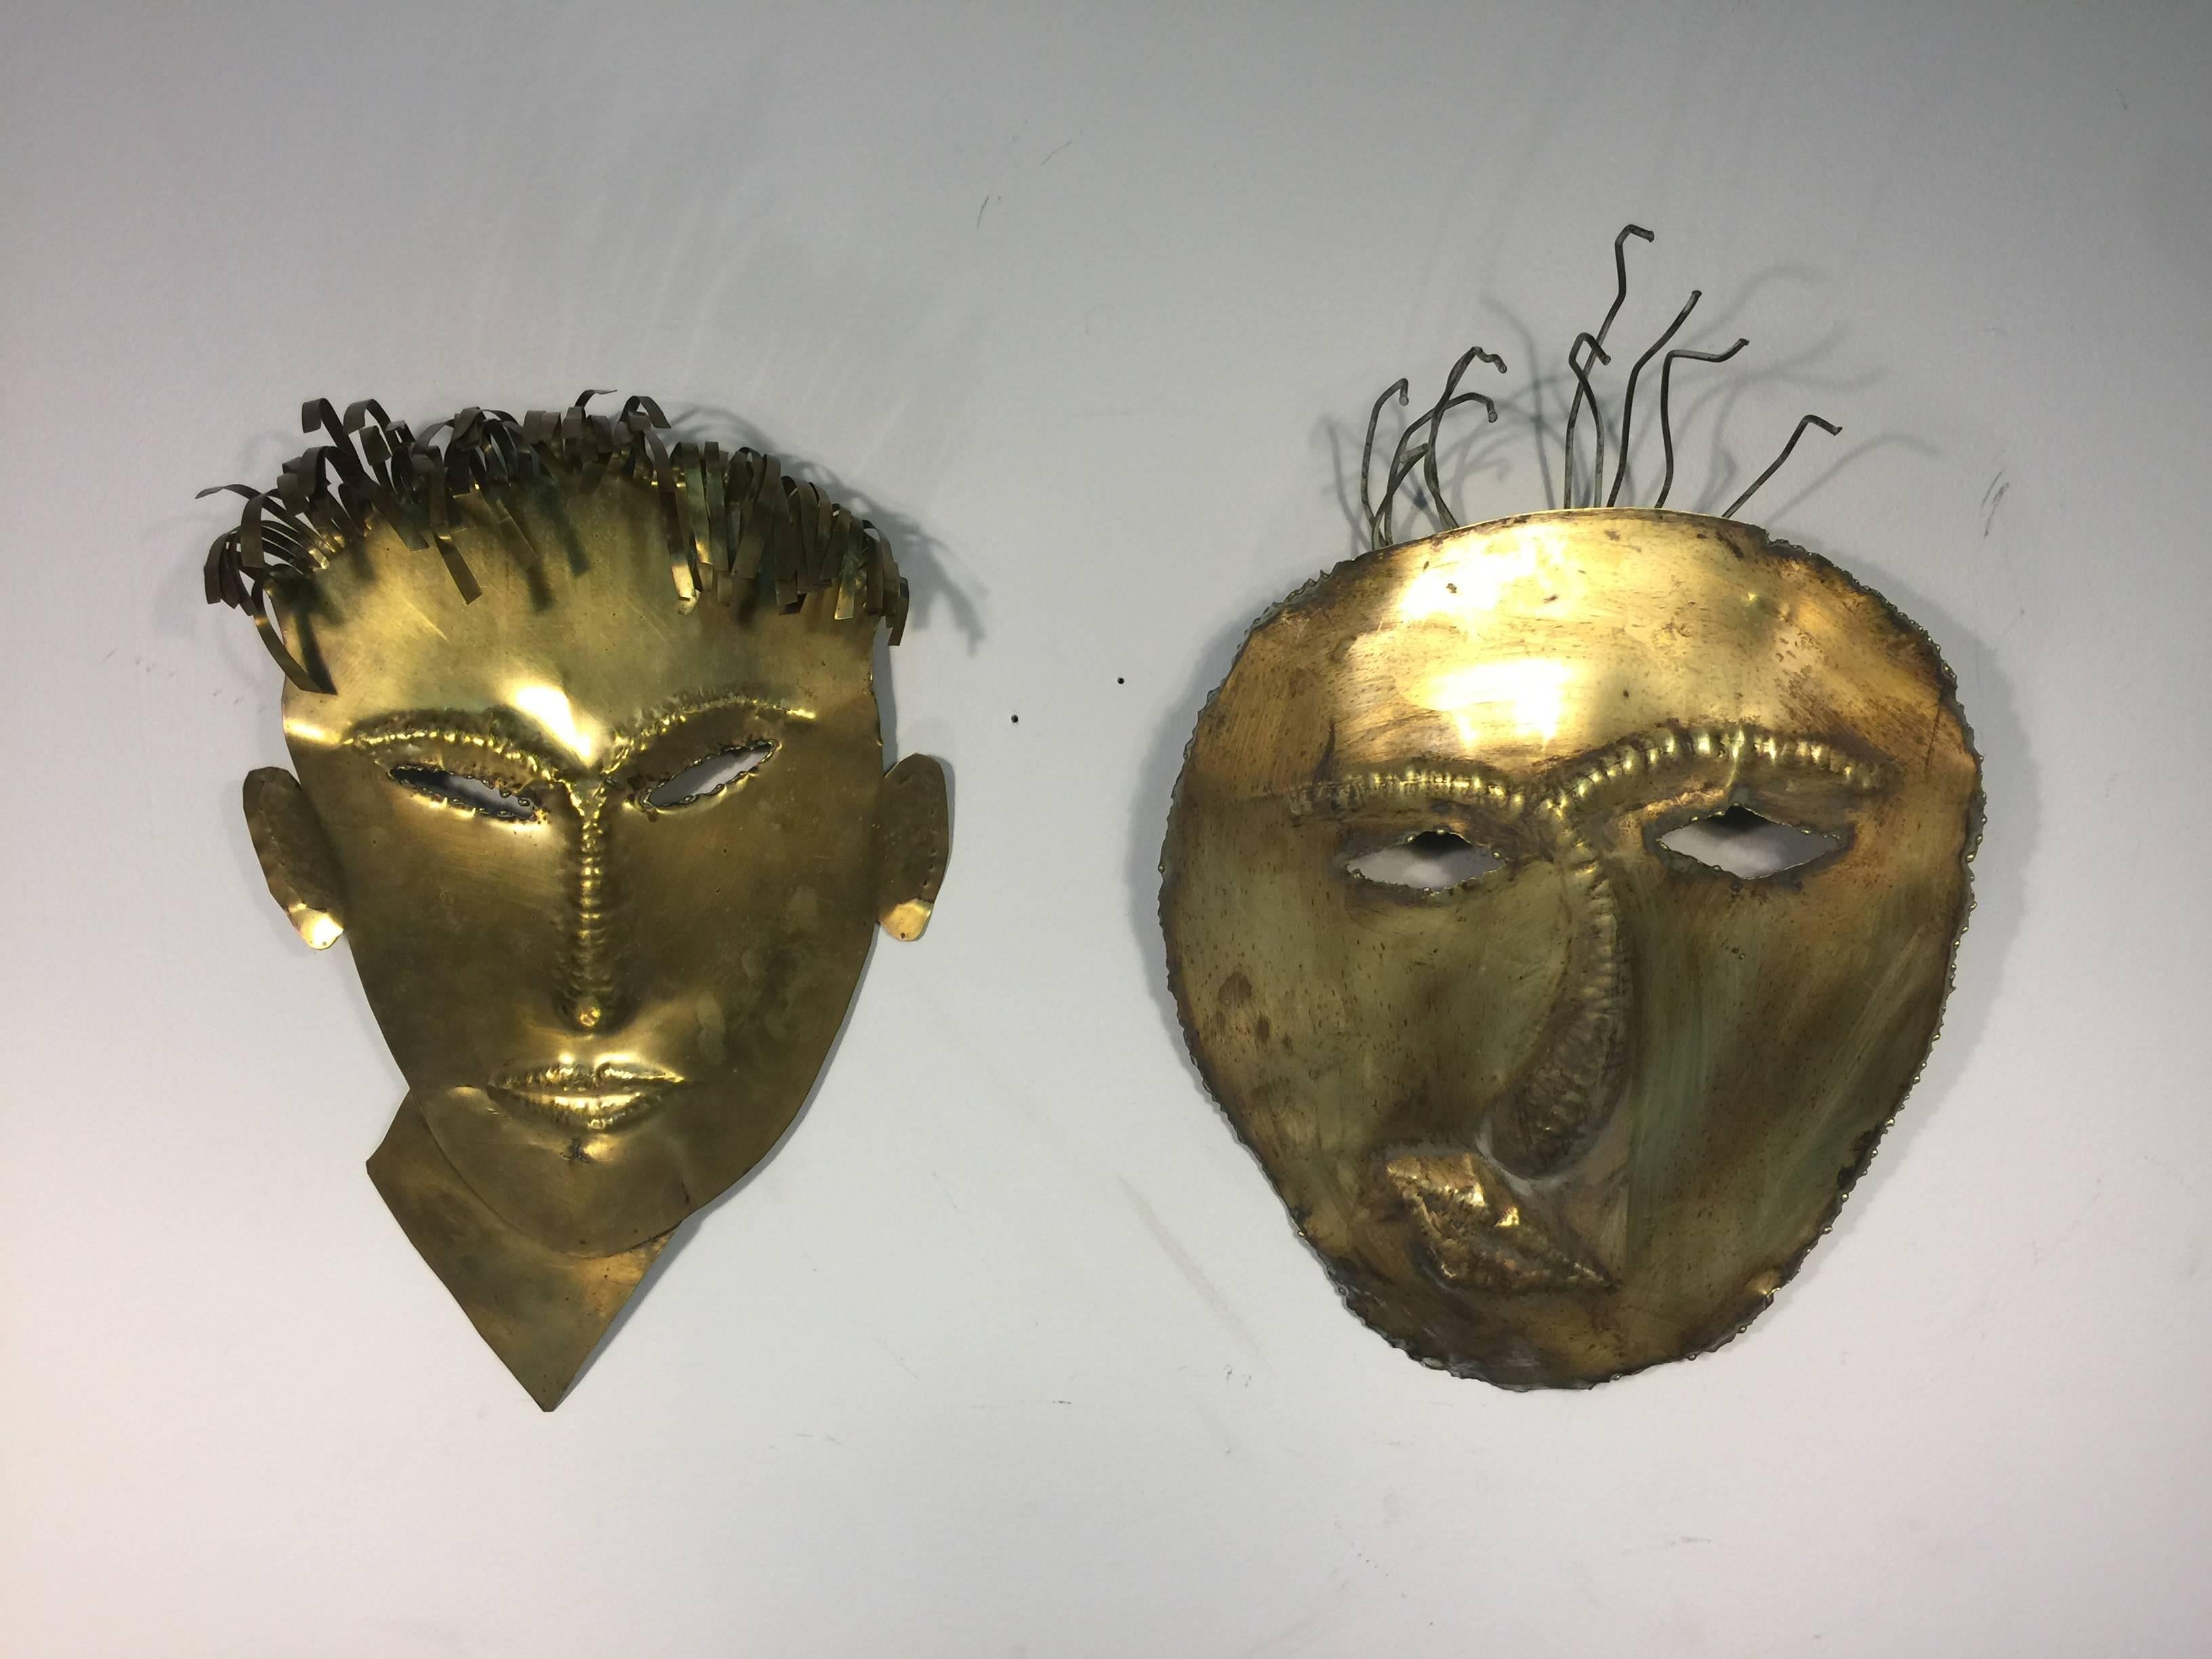 Terrific brass highly stylized male masks or face wall-mounted sculptures in the manner of Hagenauer, circa 1970. Each mask is being sold separately.

Dimensions:
15 H x 22 W x 2.5 D.
13 H x 20 W x 2 D.